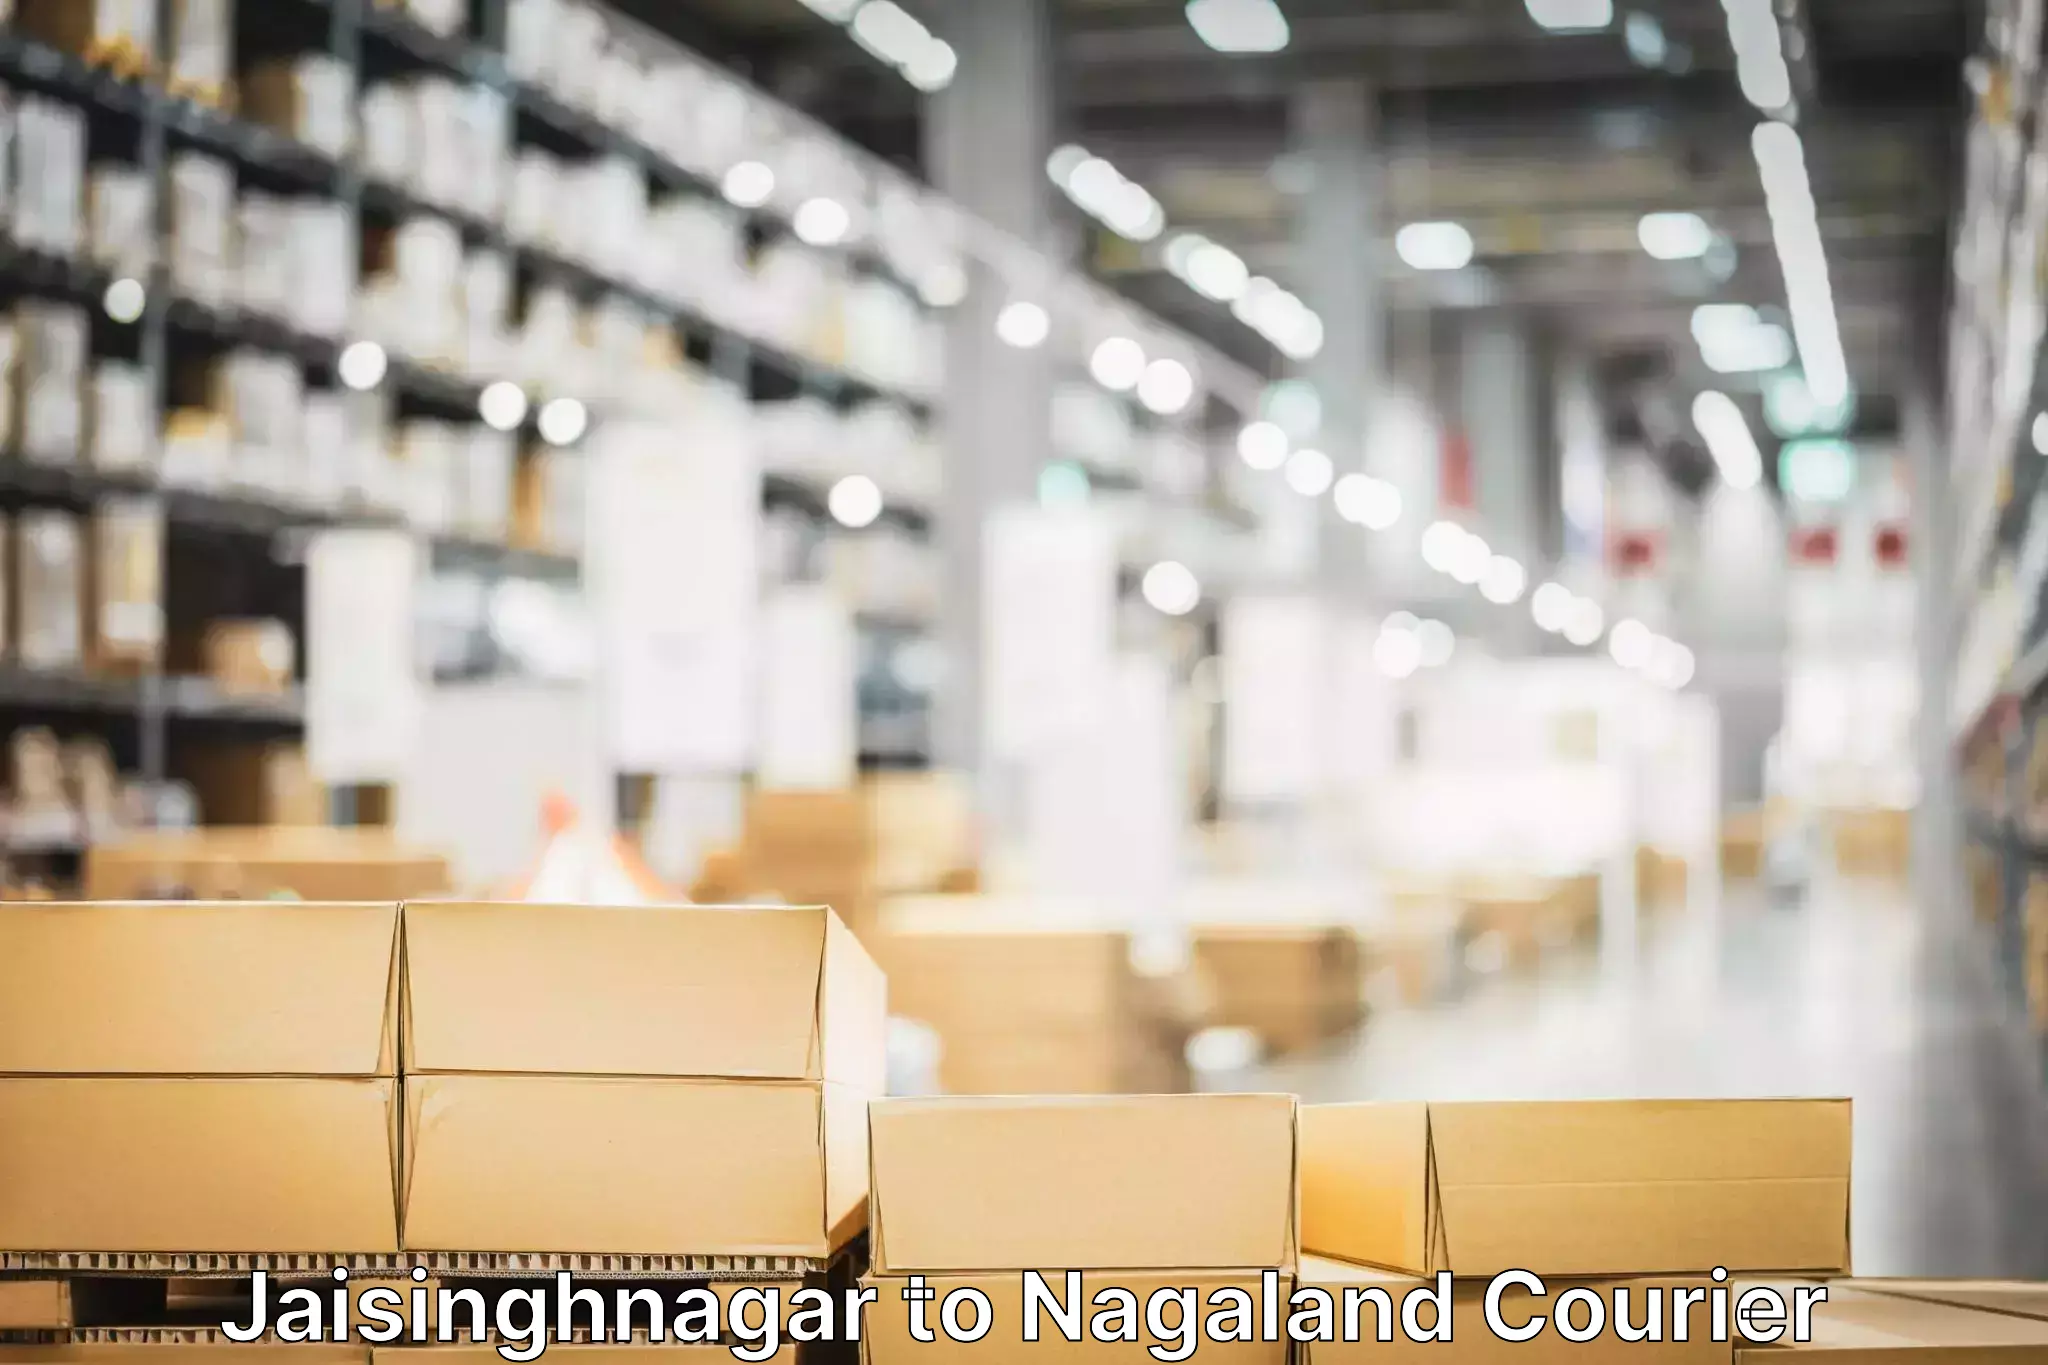 Easy access courier services in Jaisinghnagar to Nagaland